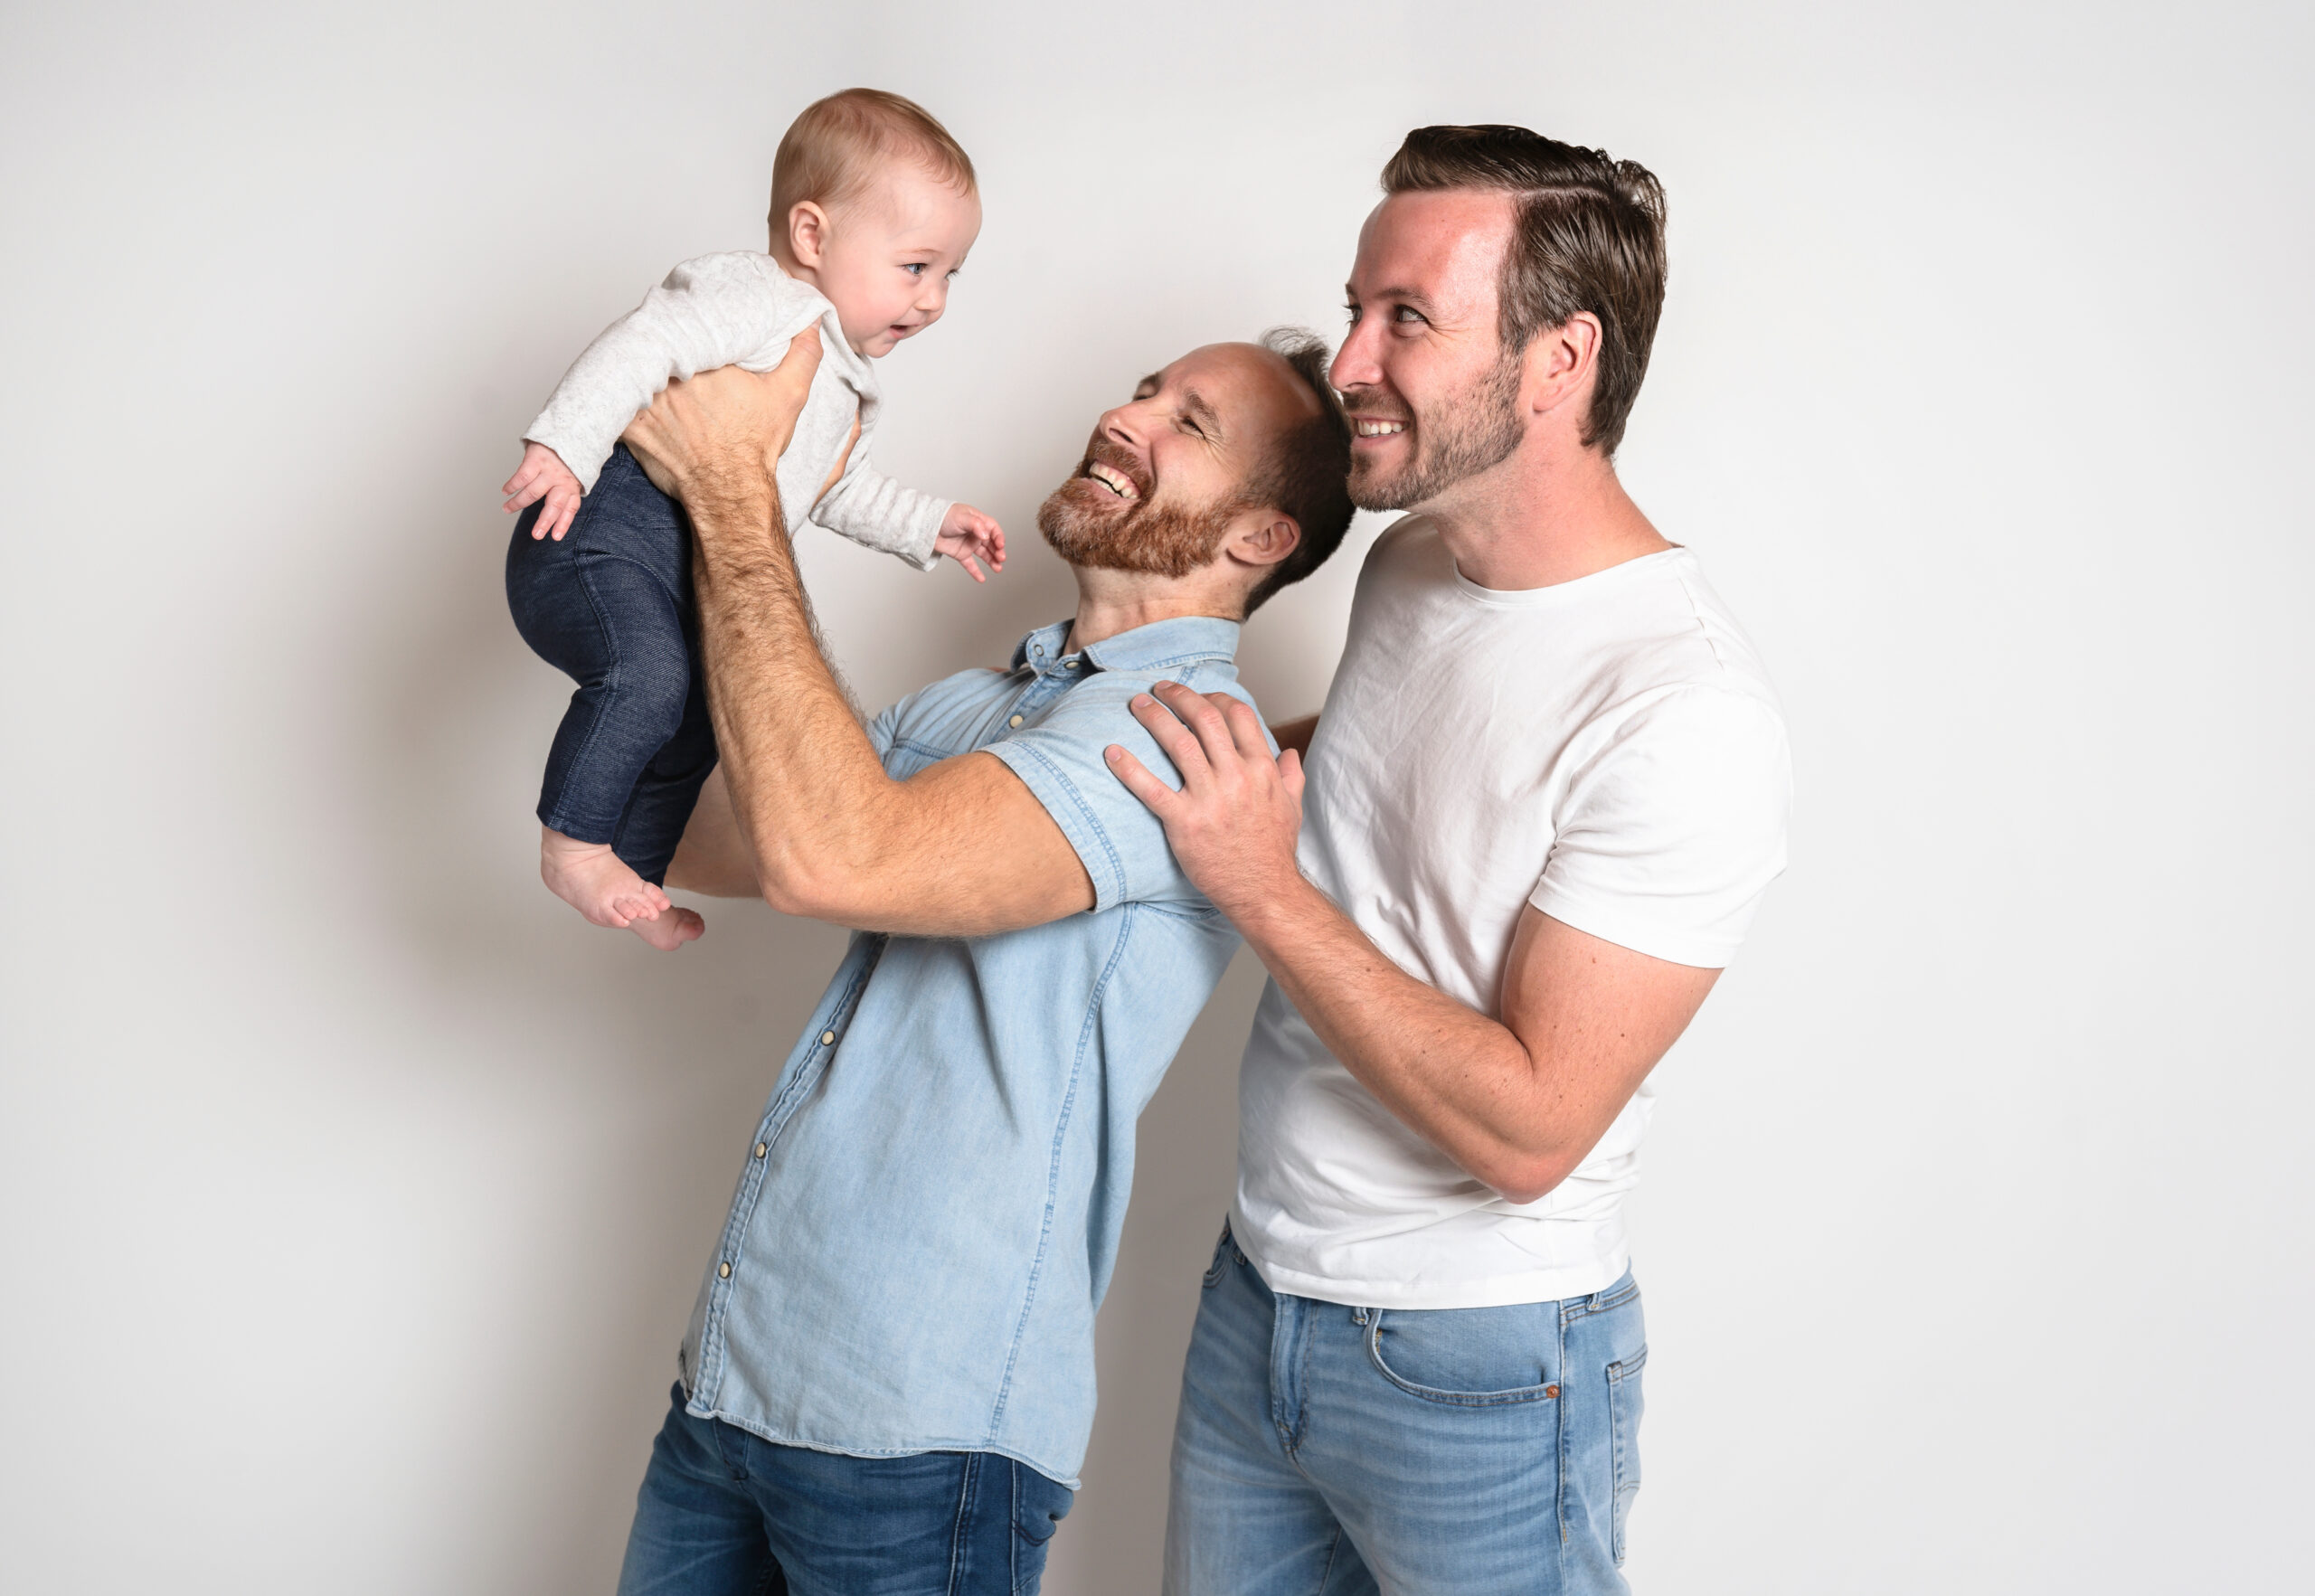 A gay couple looks up smiling at their child being held up by one of the men.